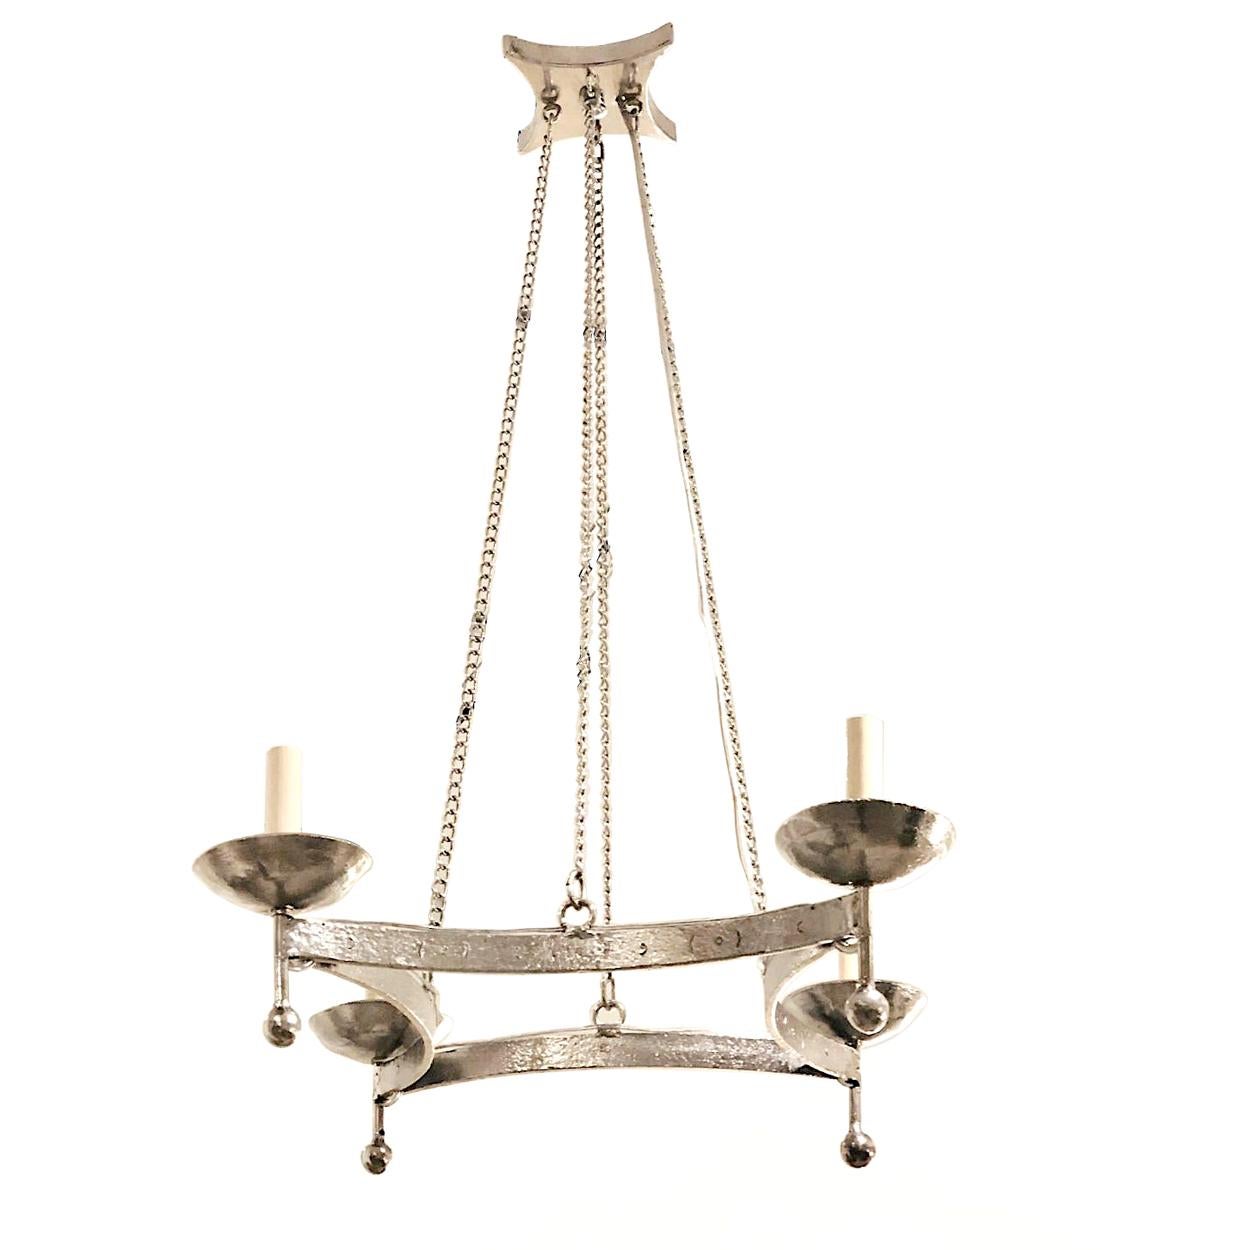 A pair of circa 1940's Italian hammered and silver plated light fixtures with 4 candelabra lights. 
Sold Individually

Measurements:
Current Drop: 35